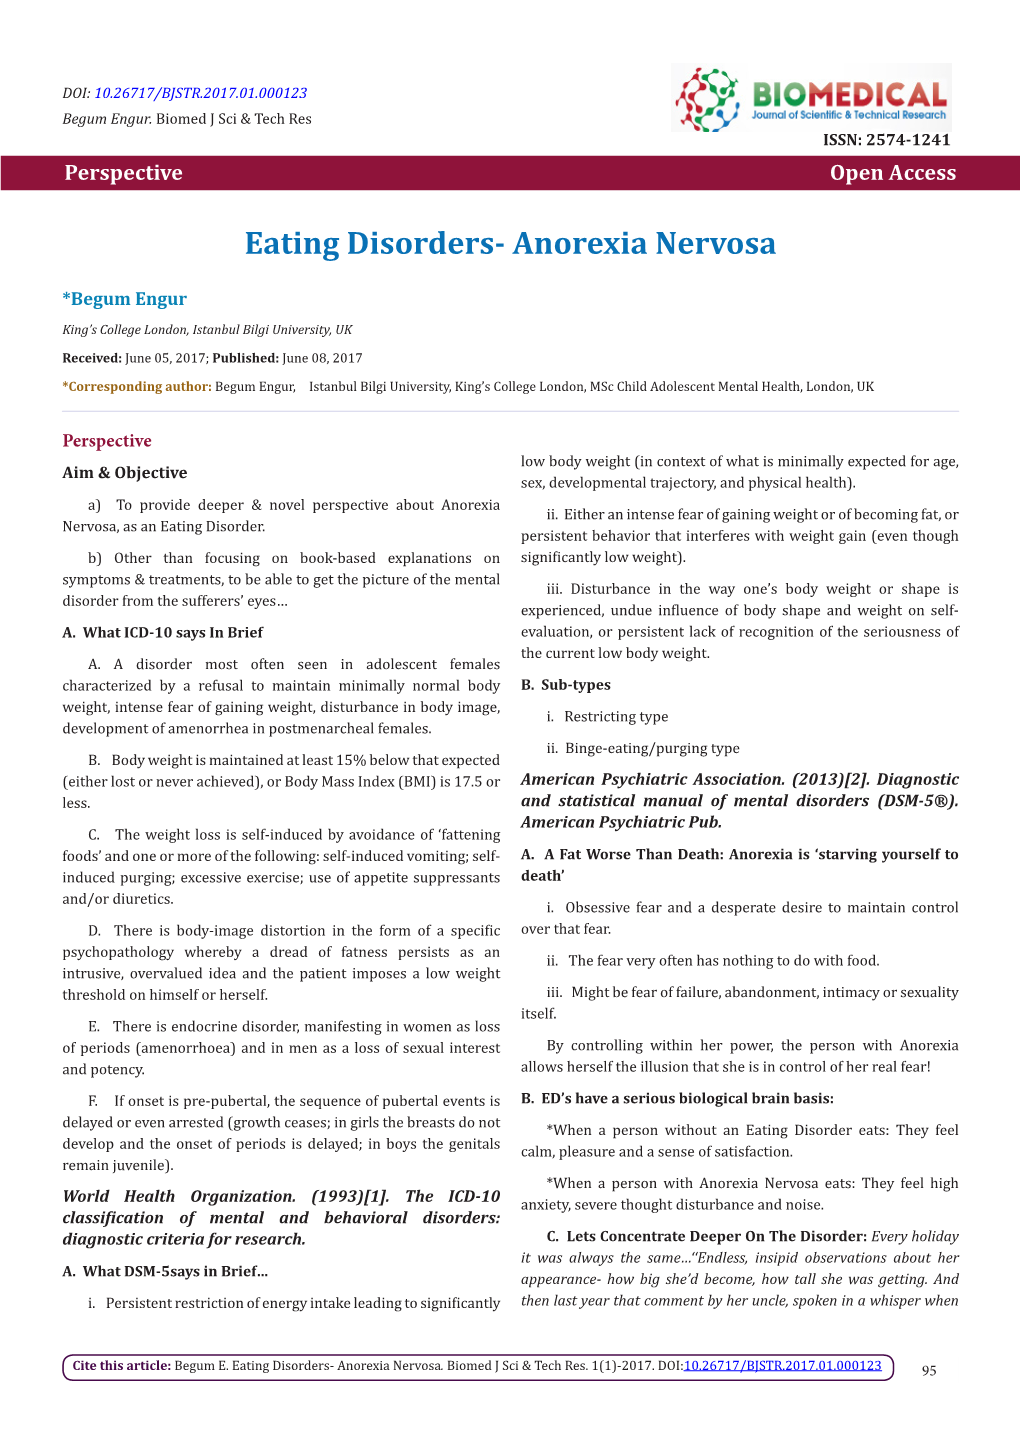 Eating Disorders- Anorexia Nervosa